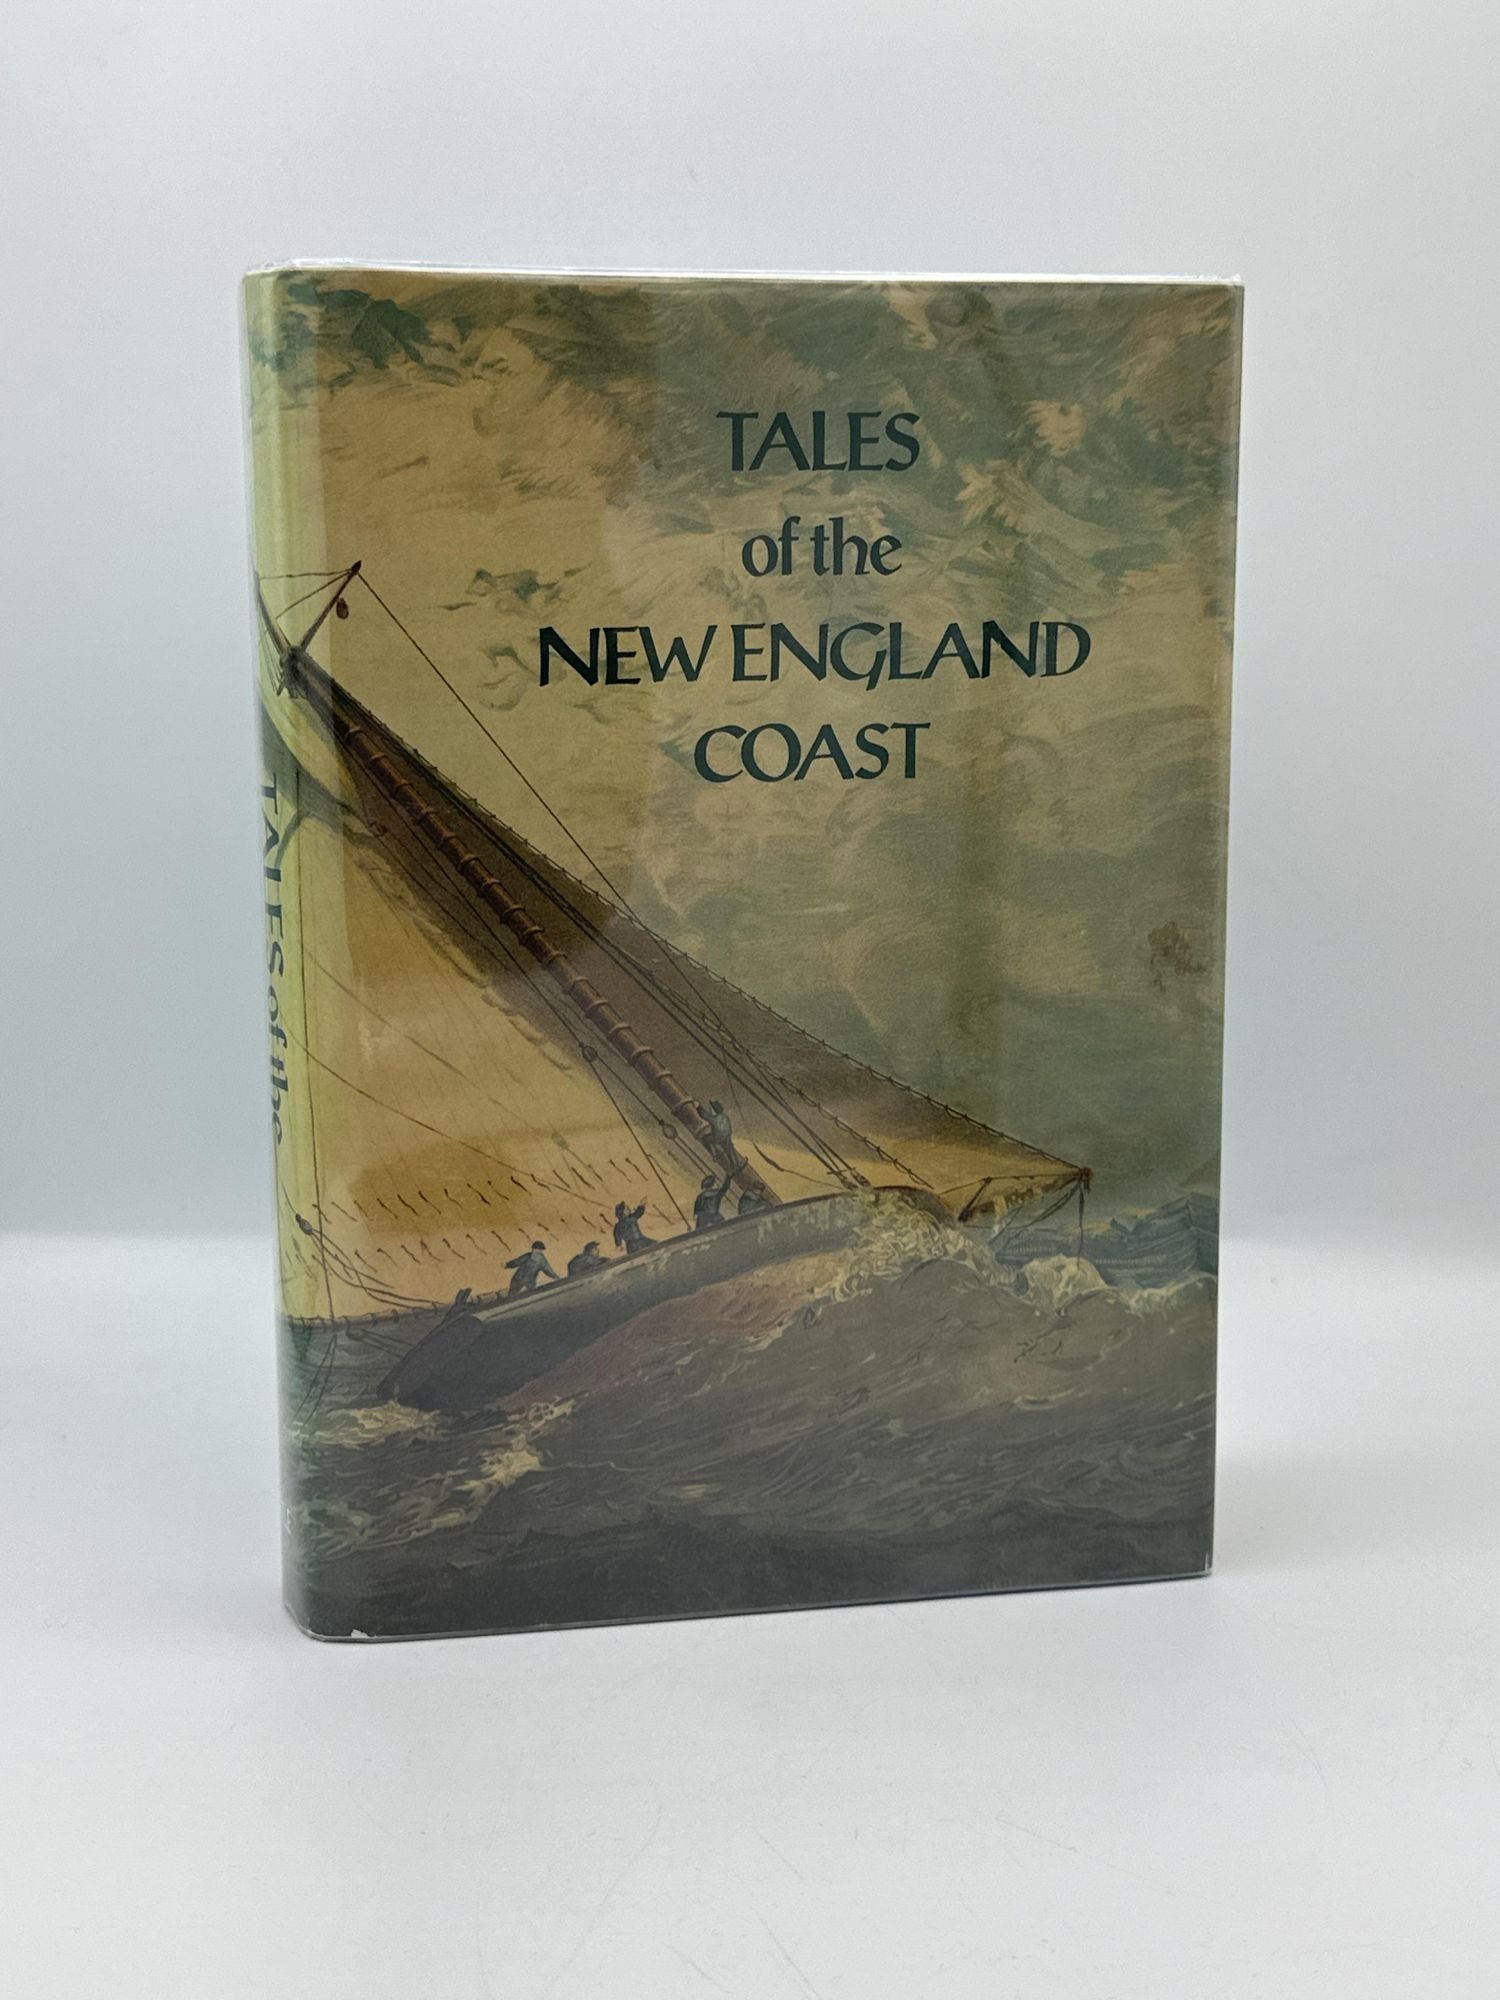 Tales of the New England Coast. Frank Oppel.